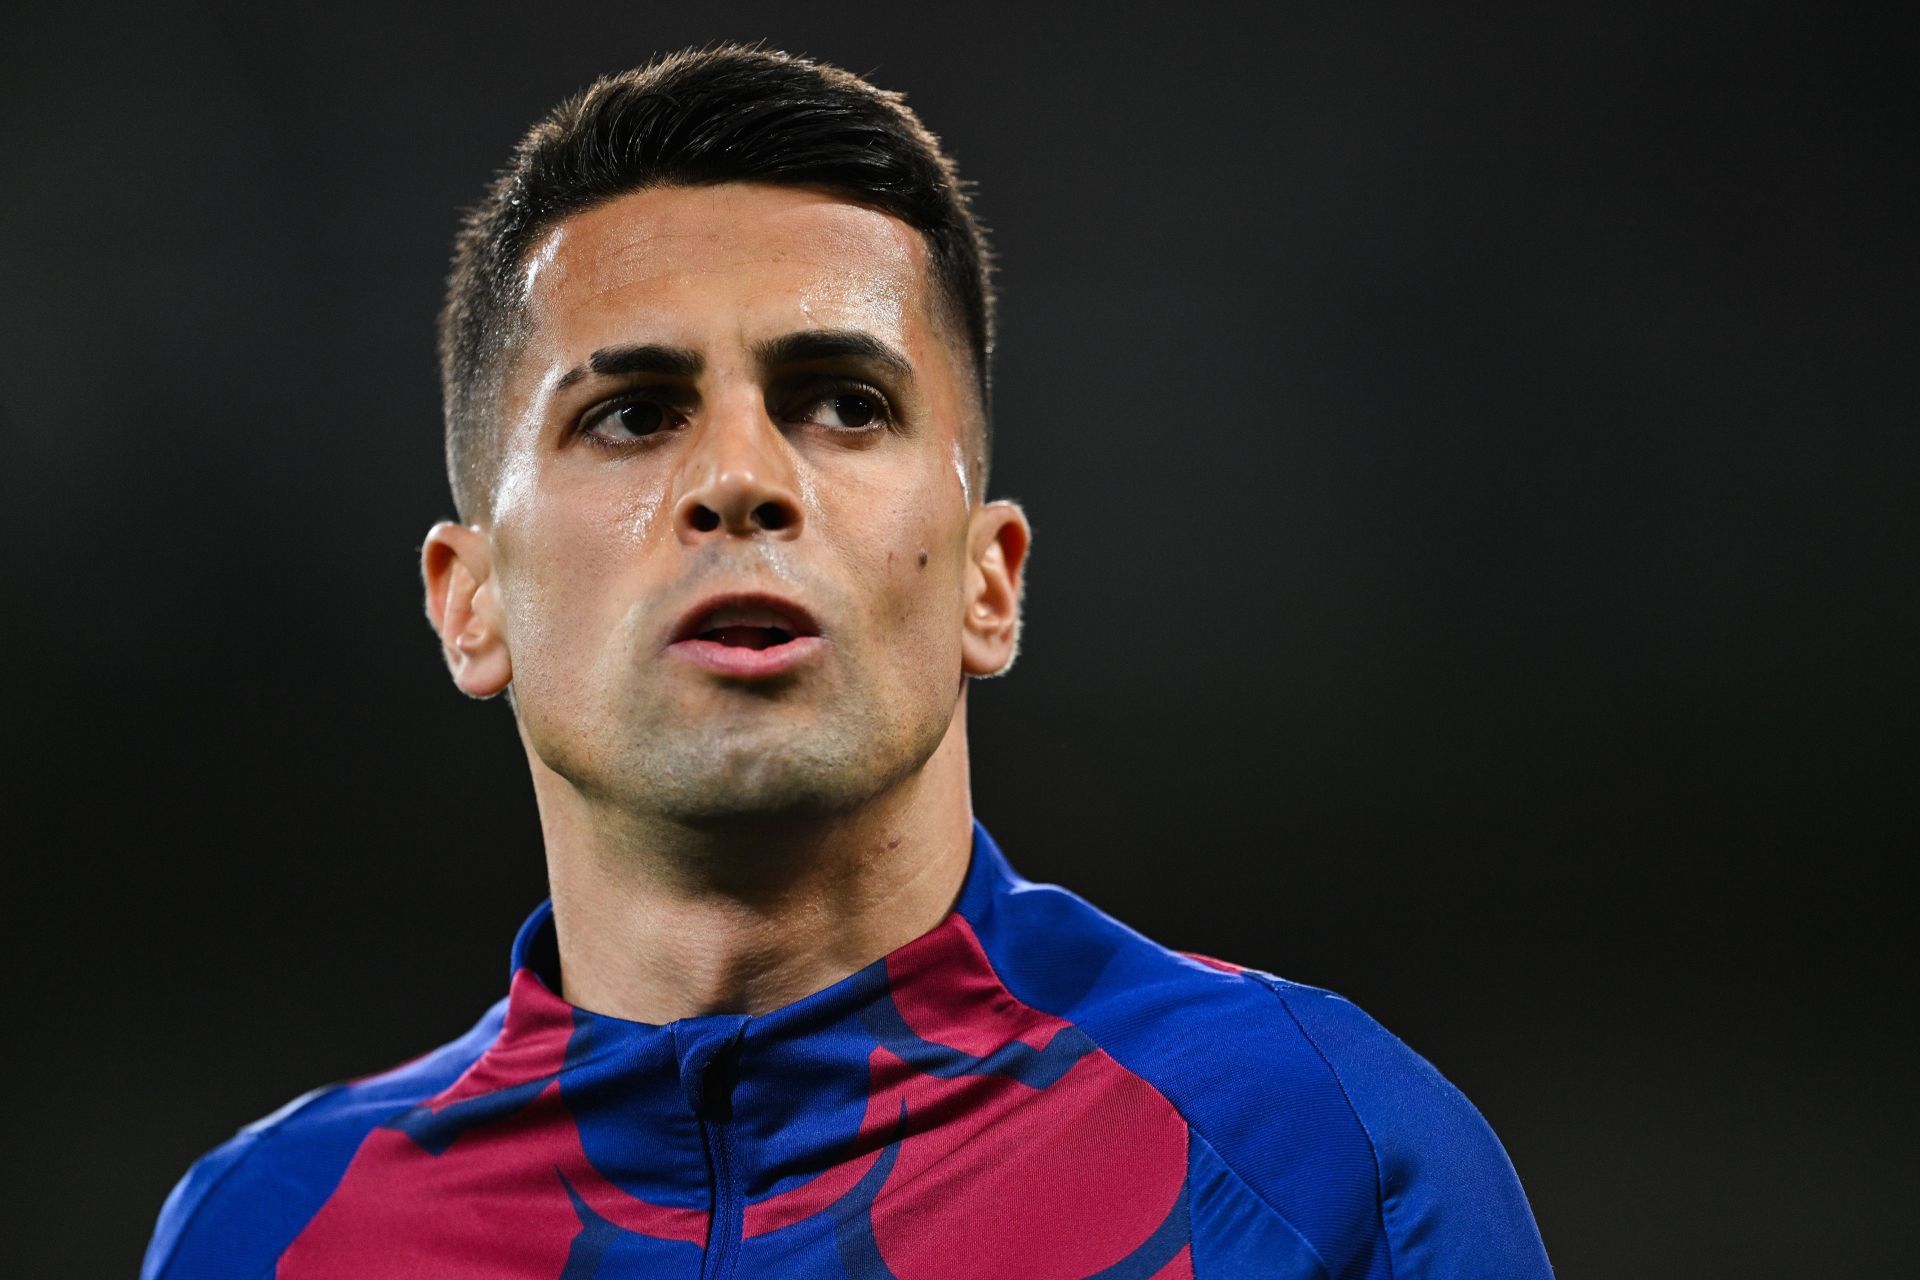 Joao Cancelo has hit the ground running at the Camp Nou this season.